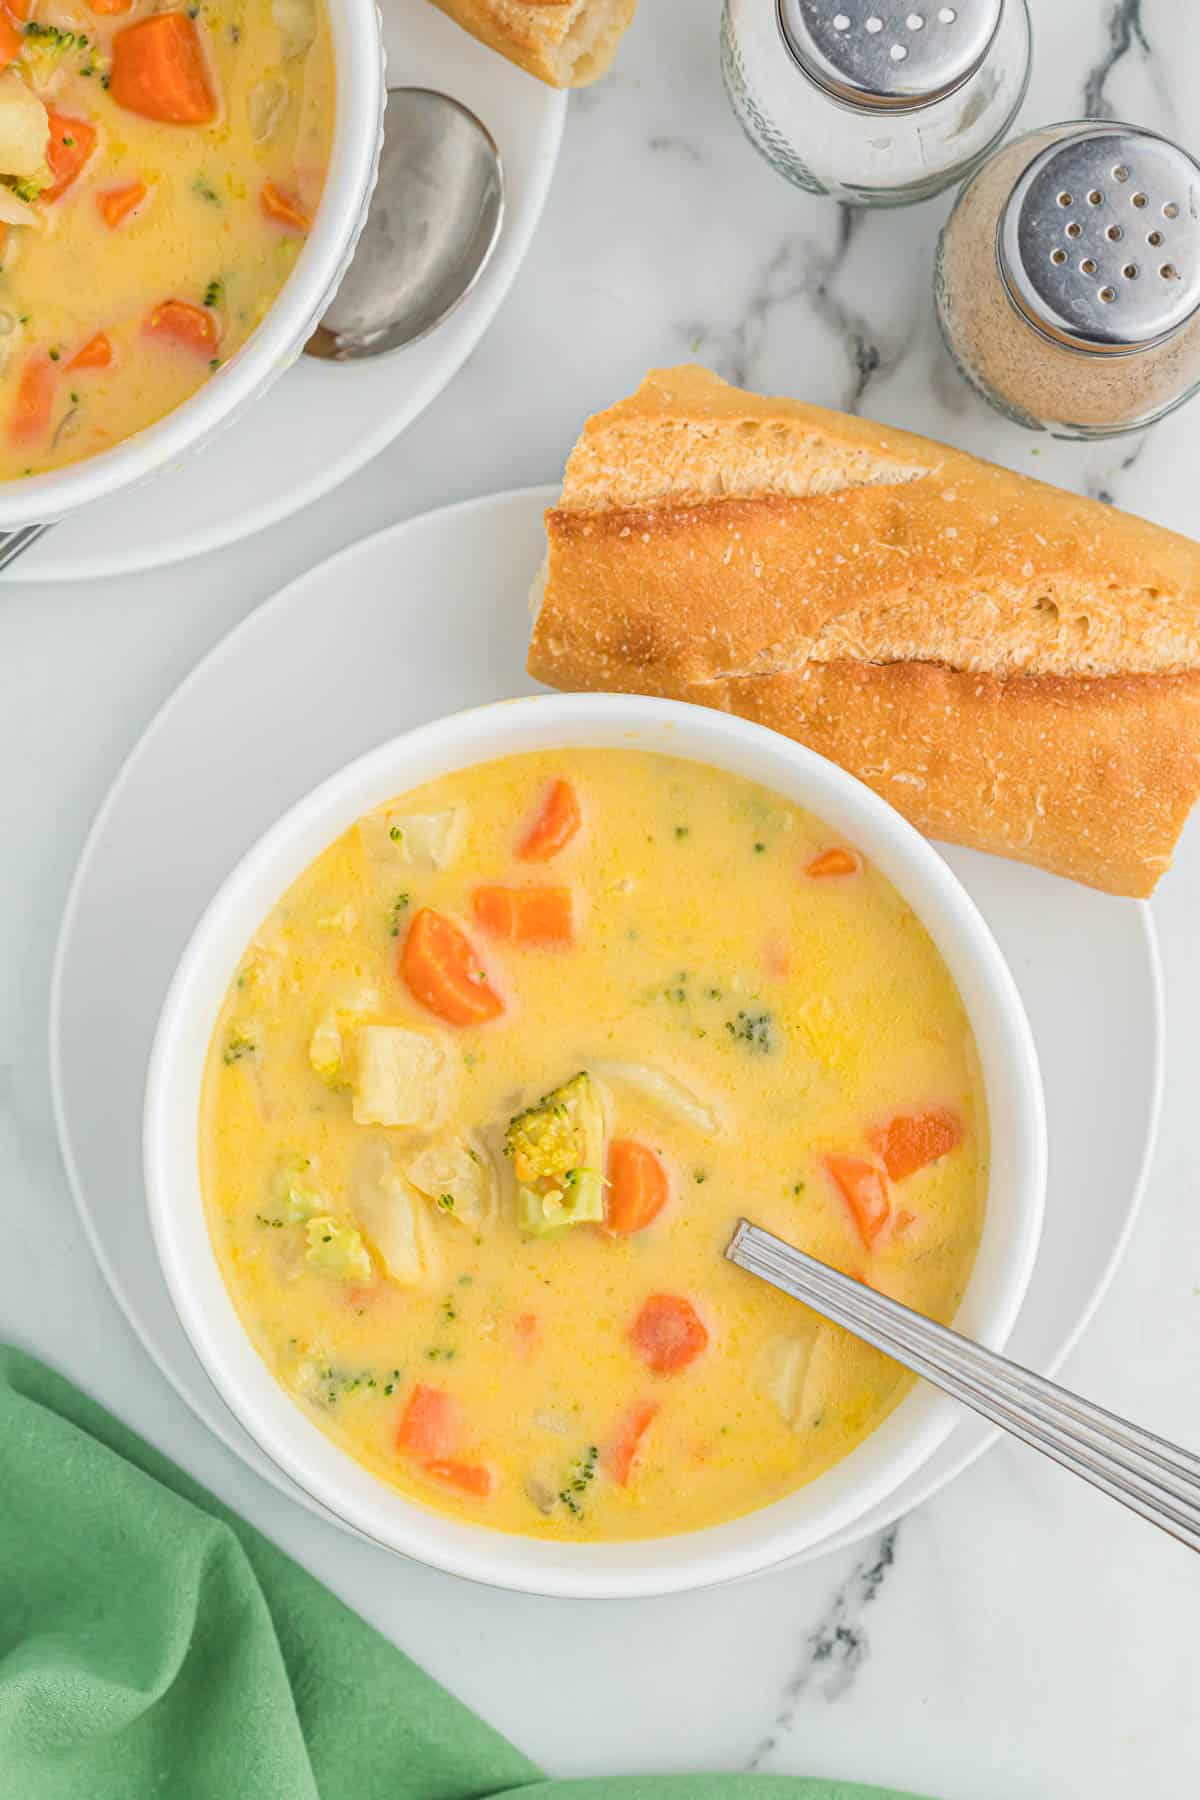 vegetable soup in a white bowl next to a baguette